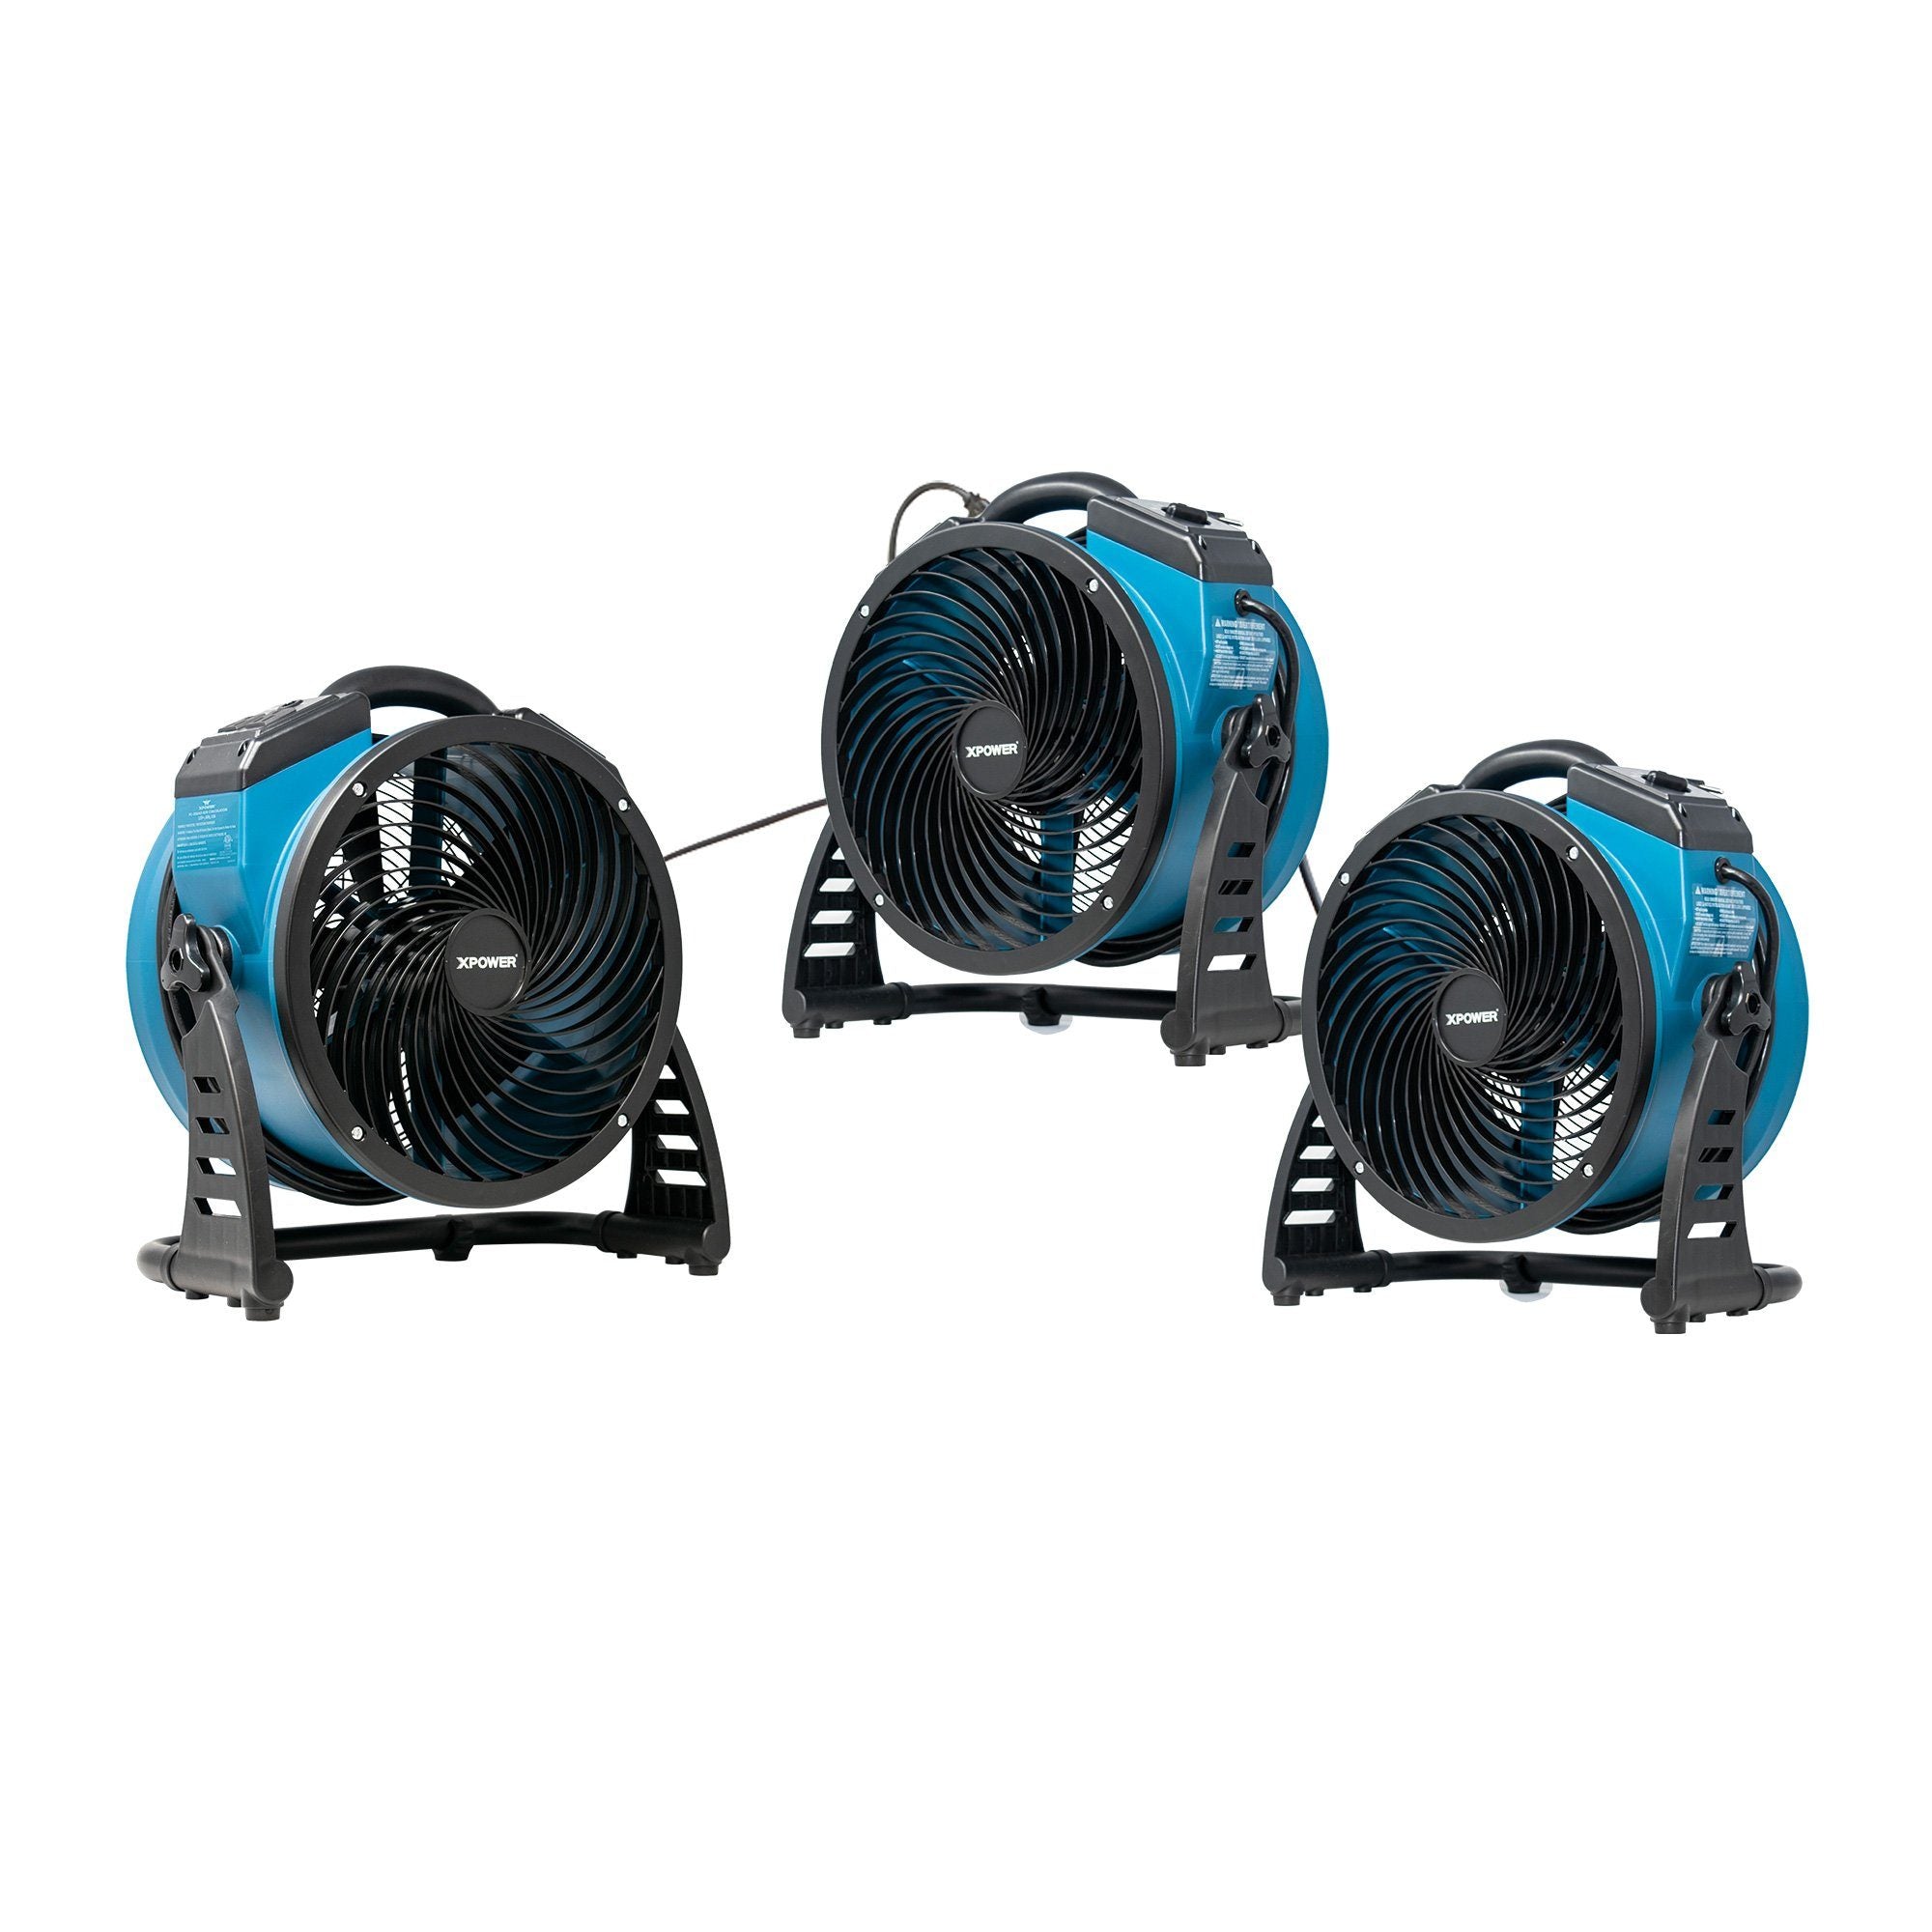 XPOWER FC-250AD Pro 13” Brushless DC Motor Air Circulator Utility Fan with Power Outlets